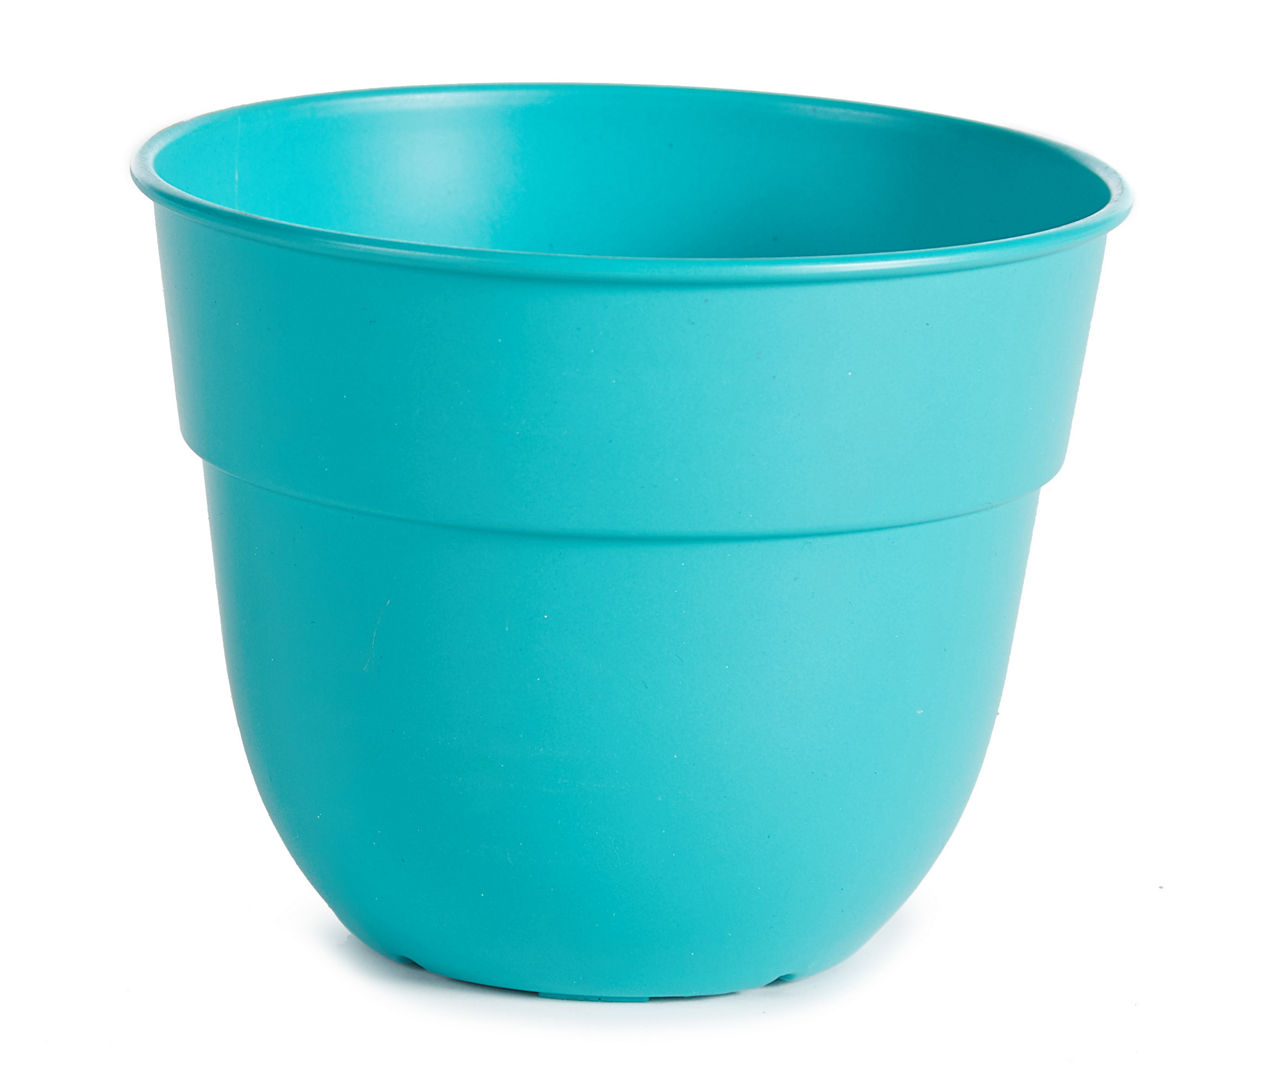 8" Teal Plastic Planter with Built-In Saucer